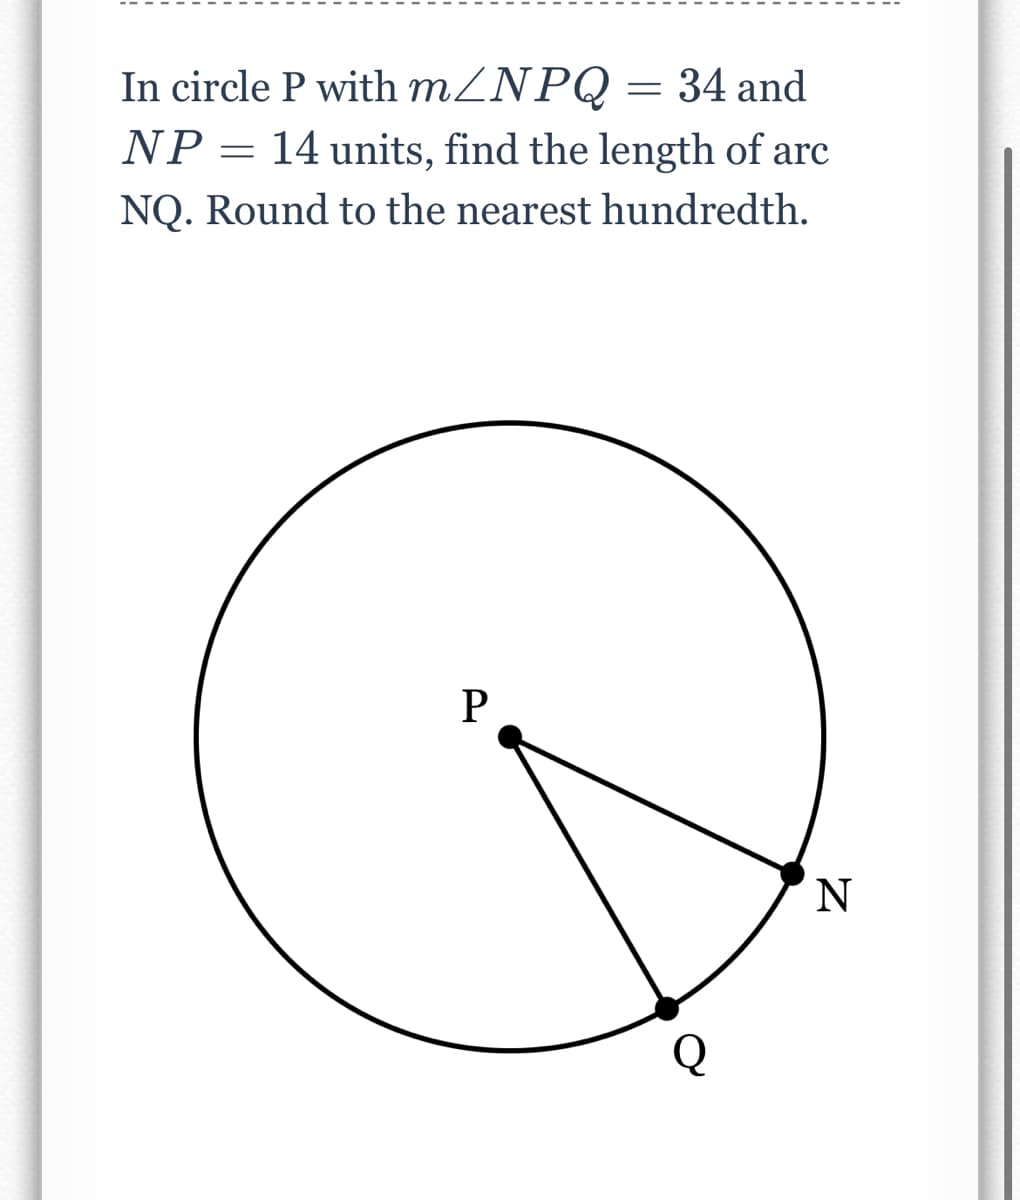 In circle P with mZNPQ = 34 and
NP= 14 units, find the length of arc
NQ. Round to the nearest hundredth.
P
Q
